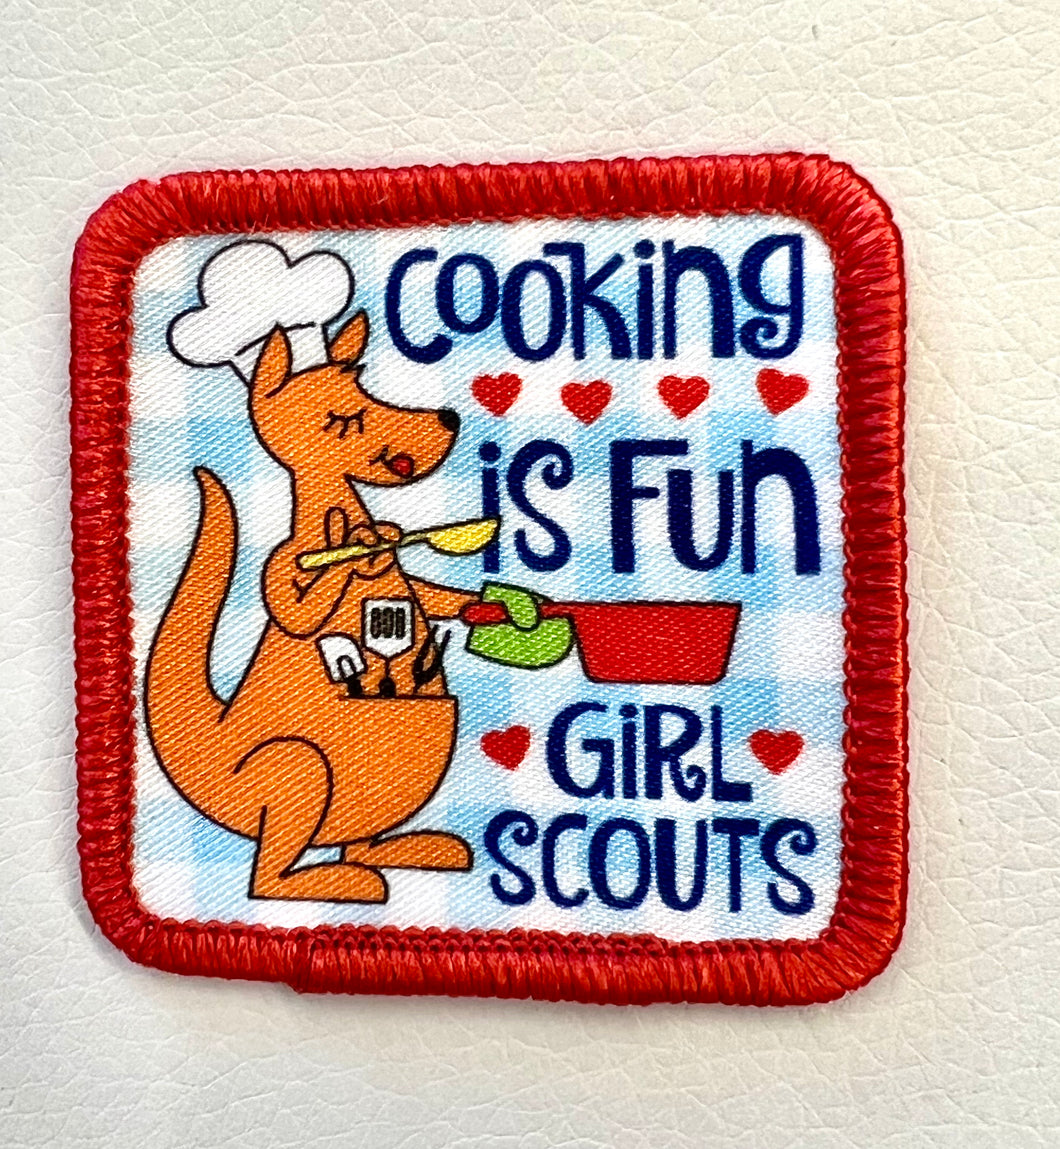 Girl scouts cooking is fun patch